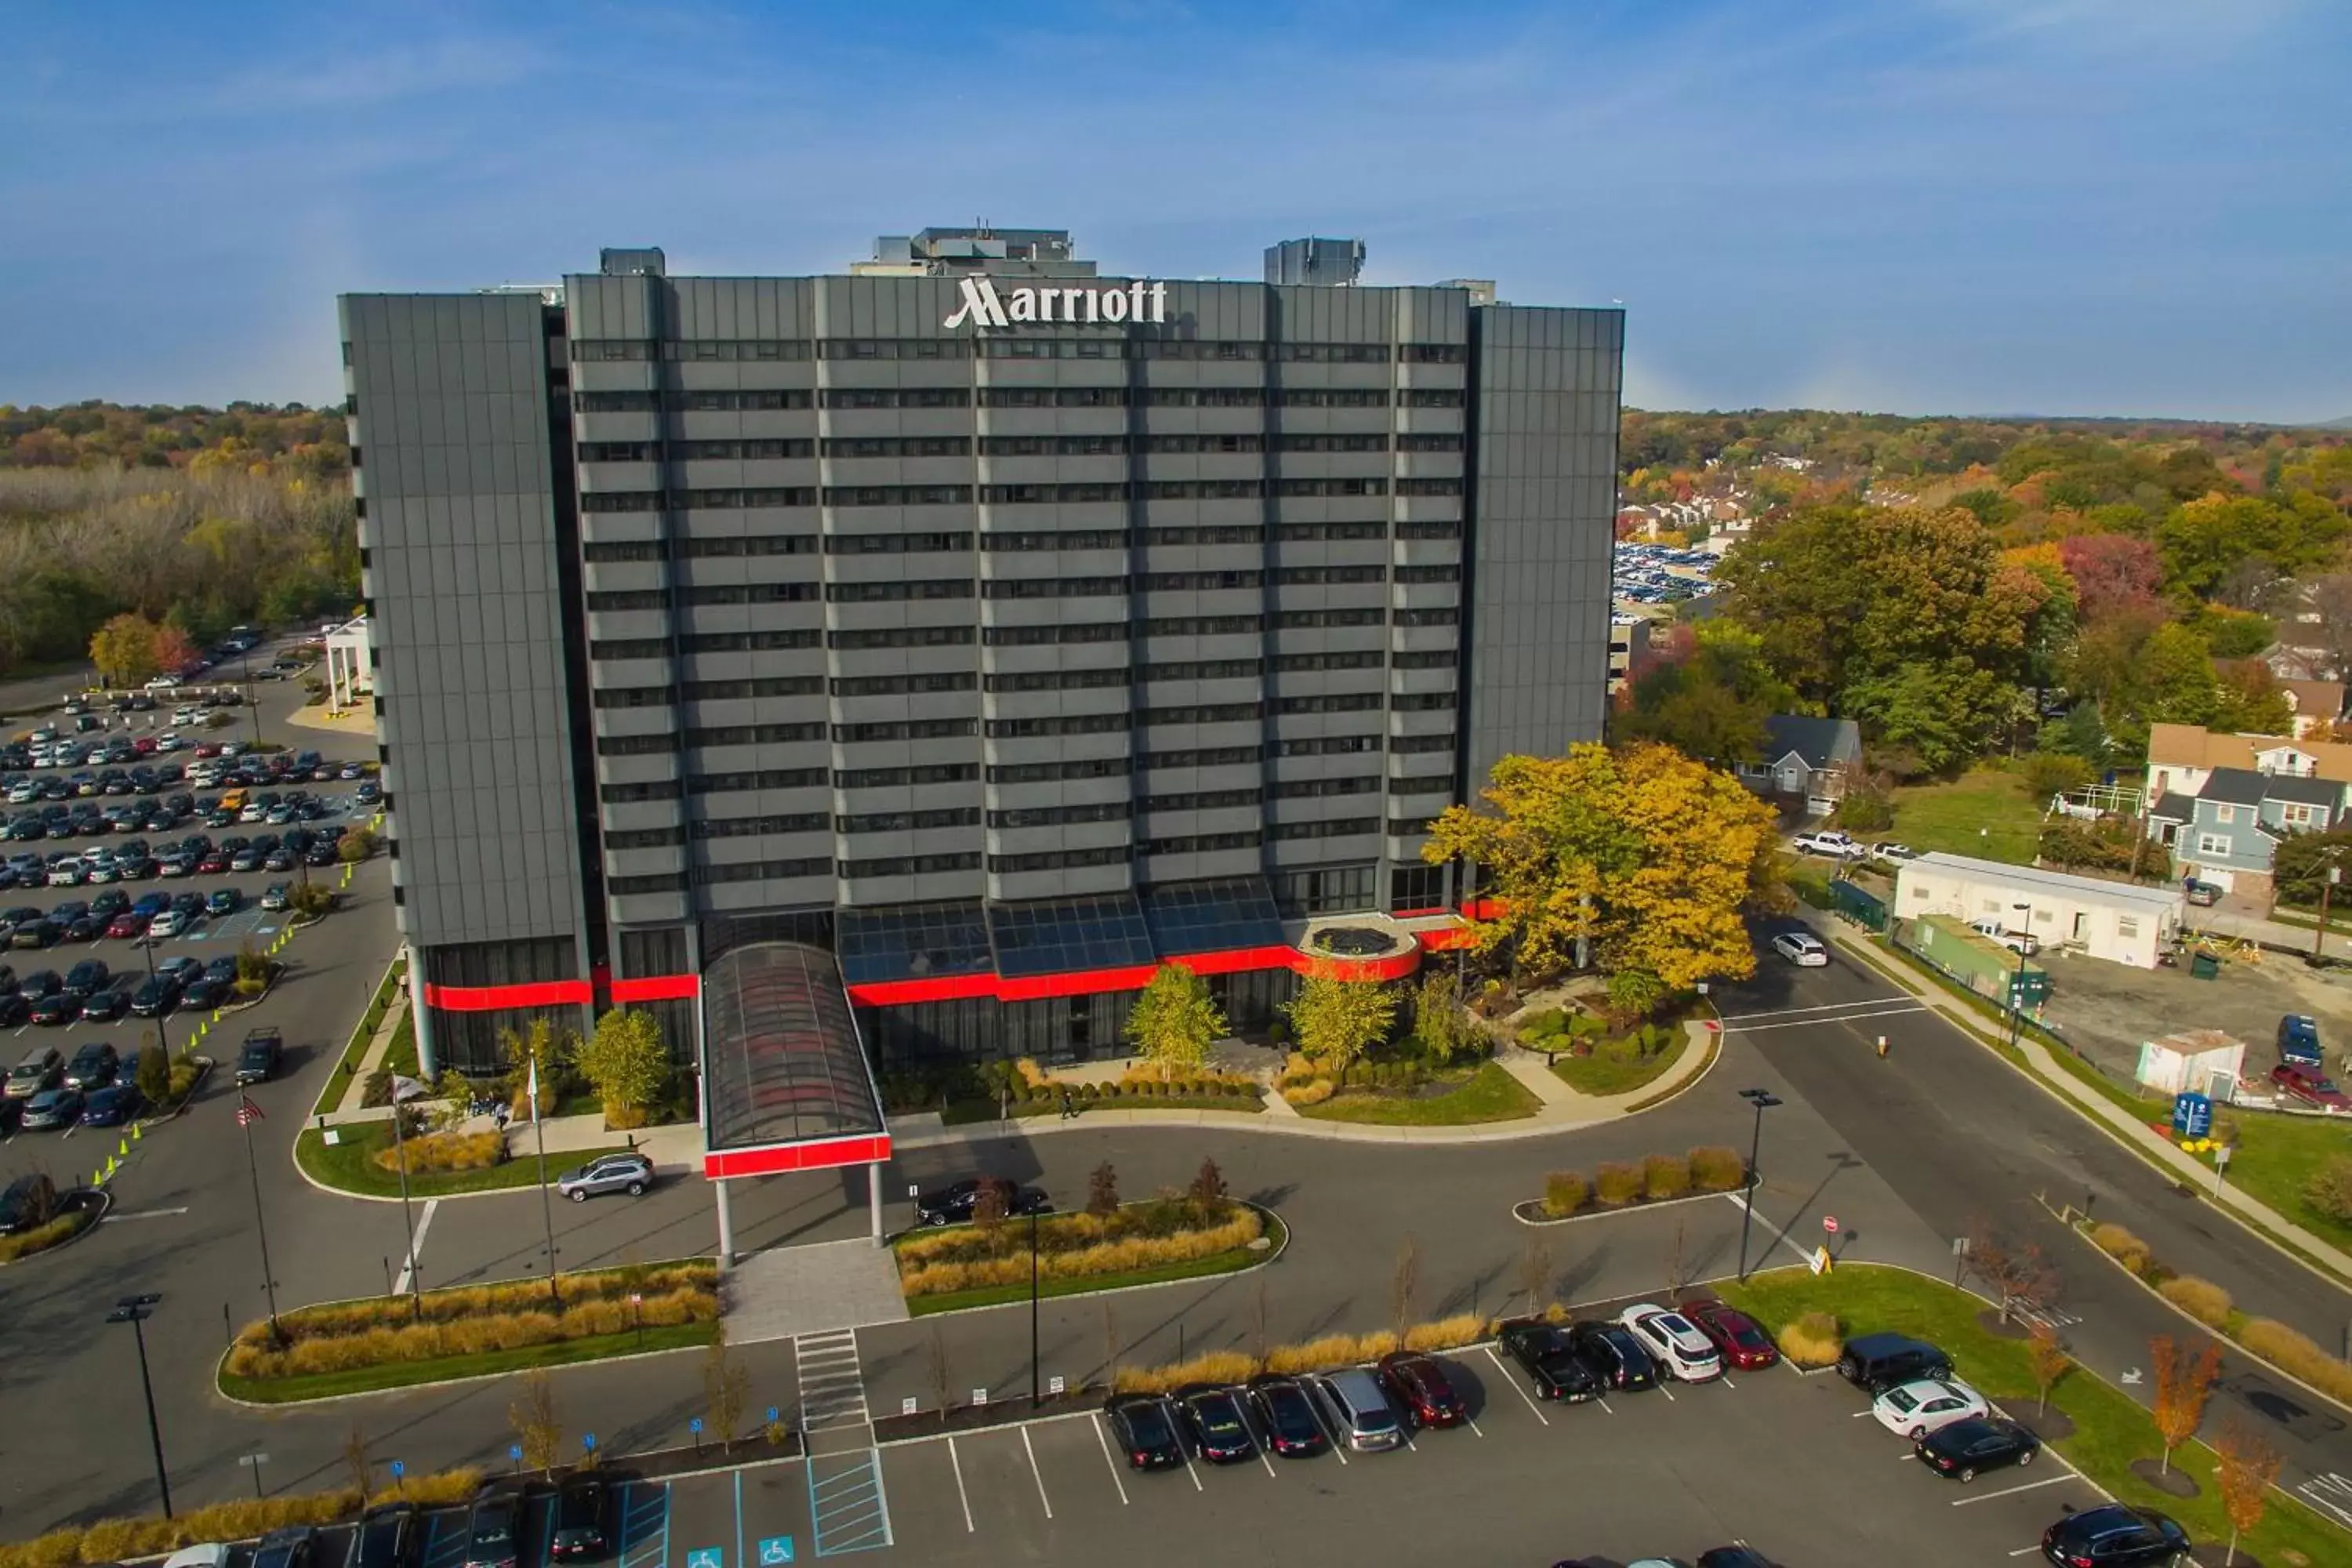 Property building, Bird's-eye View in Teaneck Marriott at Glenpointe